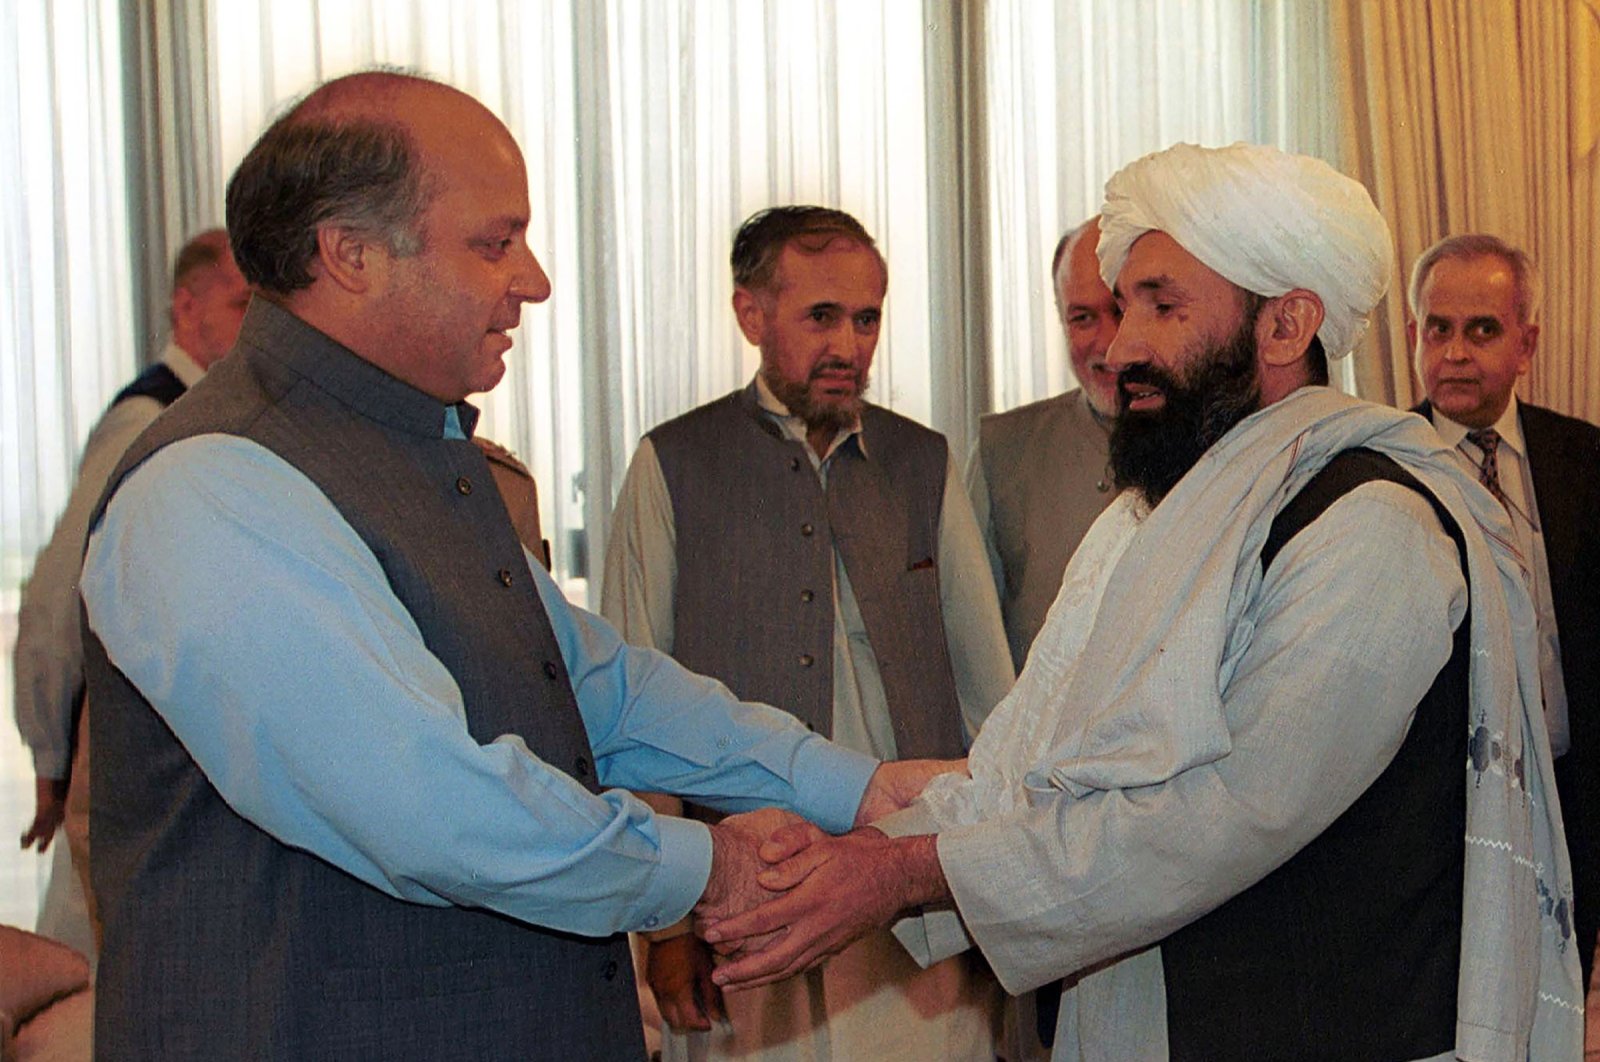 Mullah Mohammad Hasan Akhund (R), Afghanistan's then-foreign minister, is received by Pakistani then-Prime Minister Nawaz Sharif, in Islamabad, Pakistan, Aug. 25, 1999. (AP File Photo)